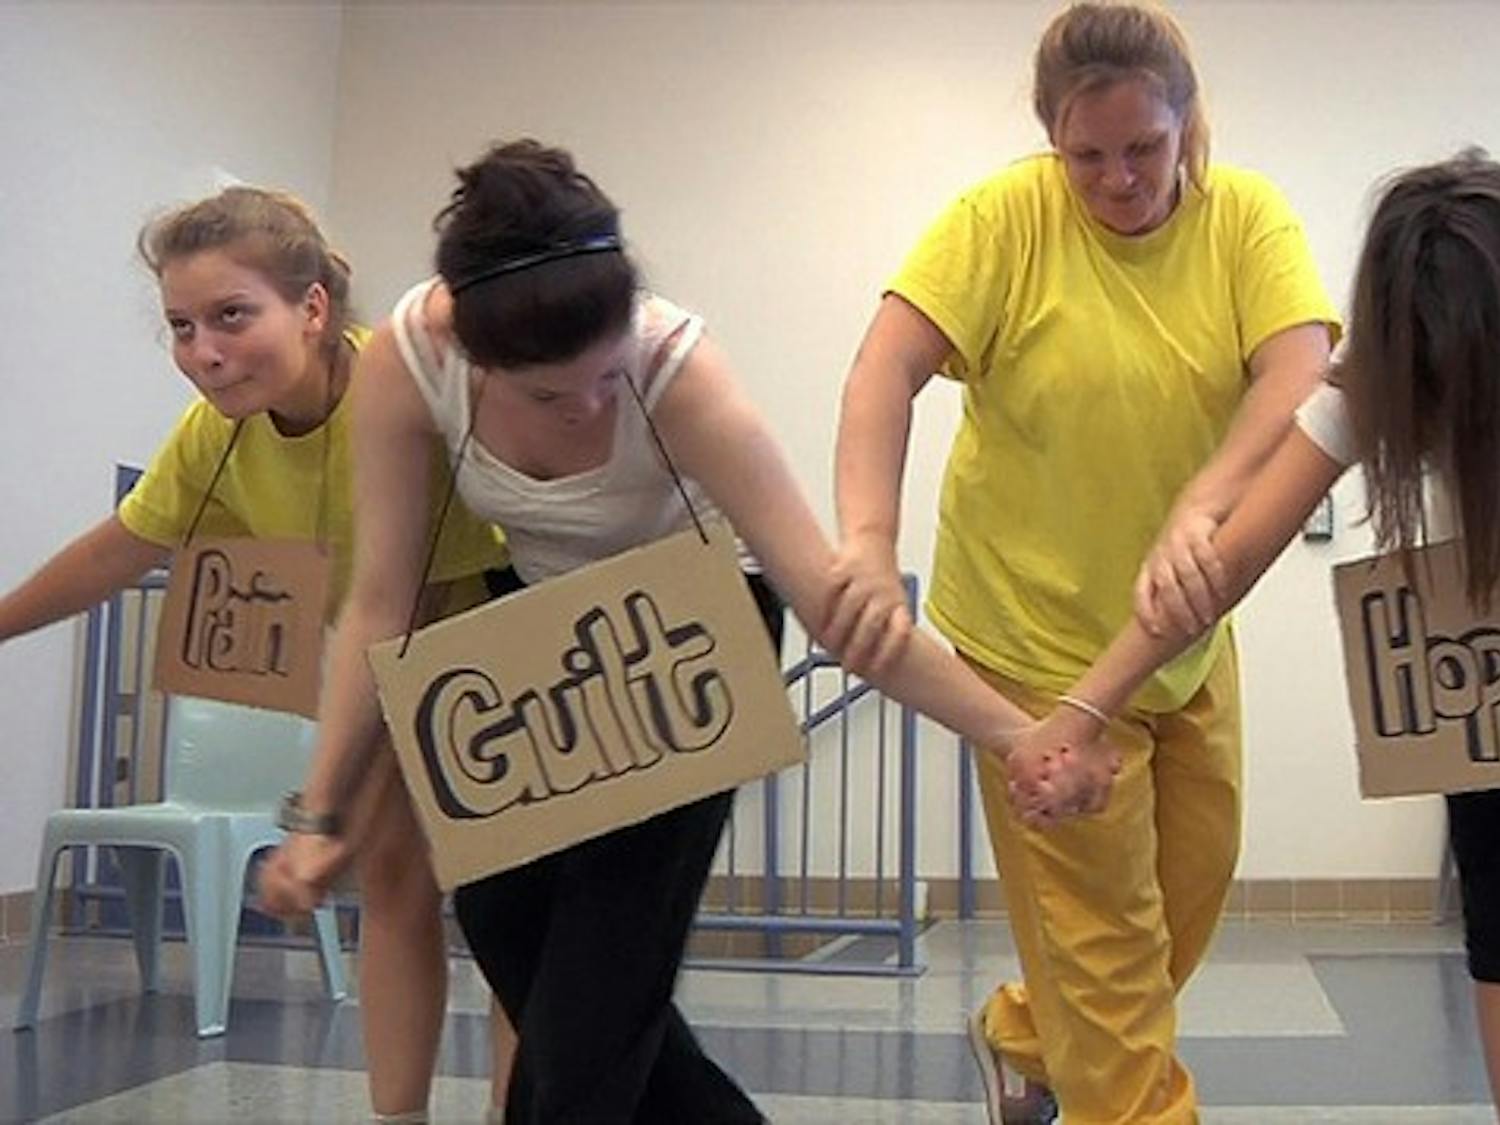 Dartmouth students and inmates hold up cardboard signs as part of their theatrical production.